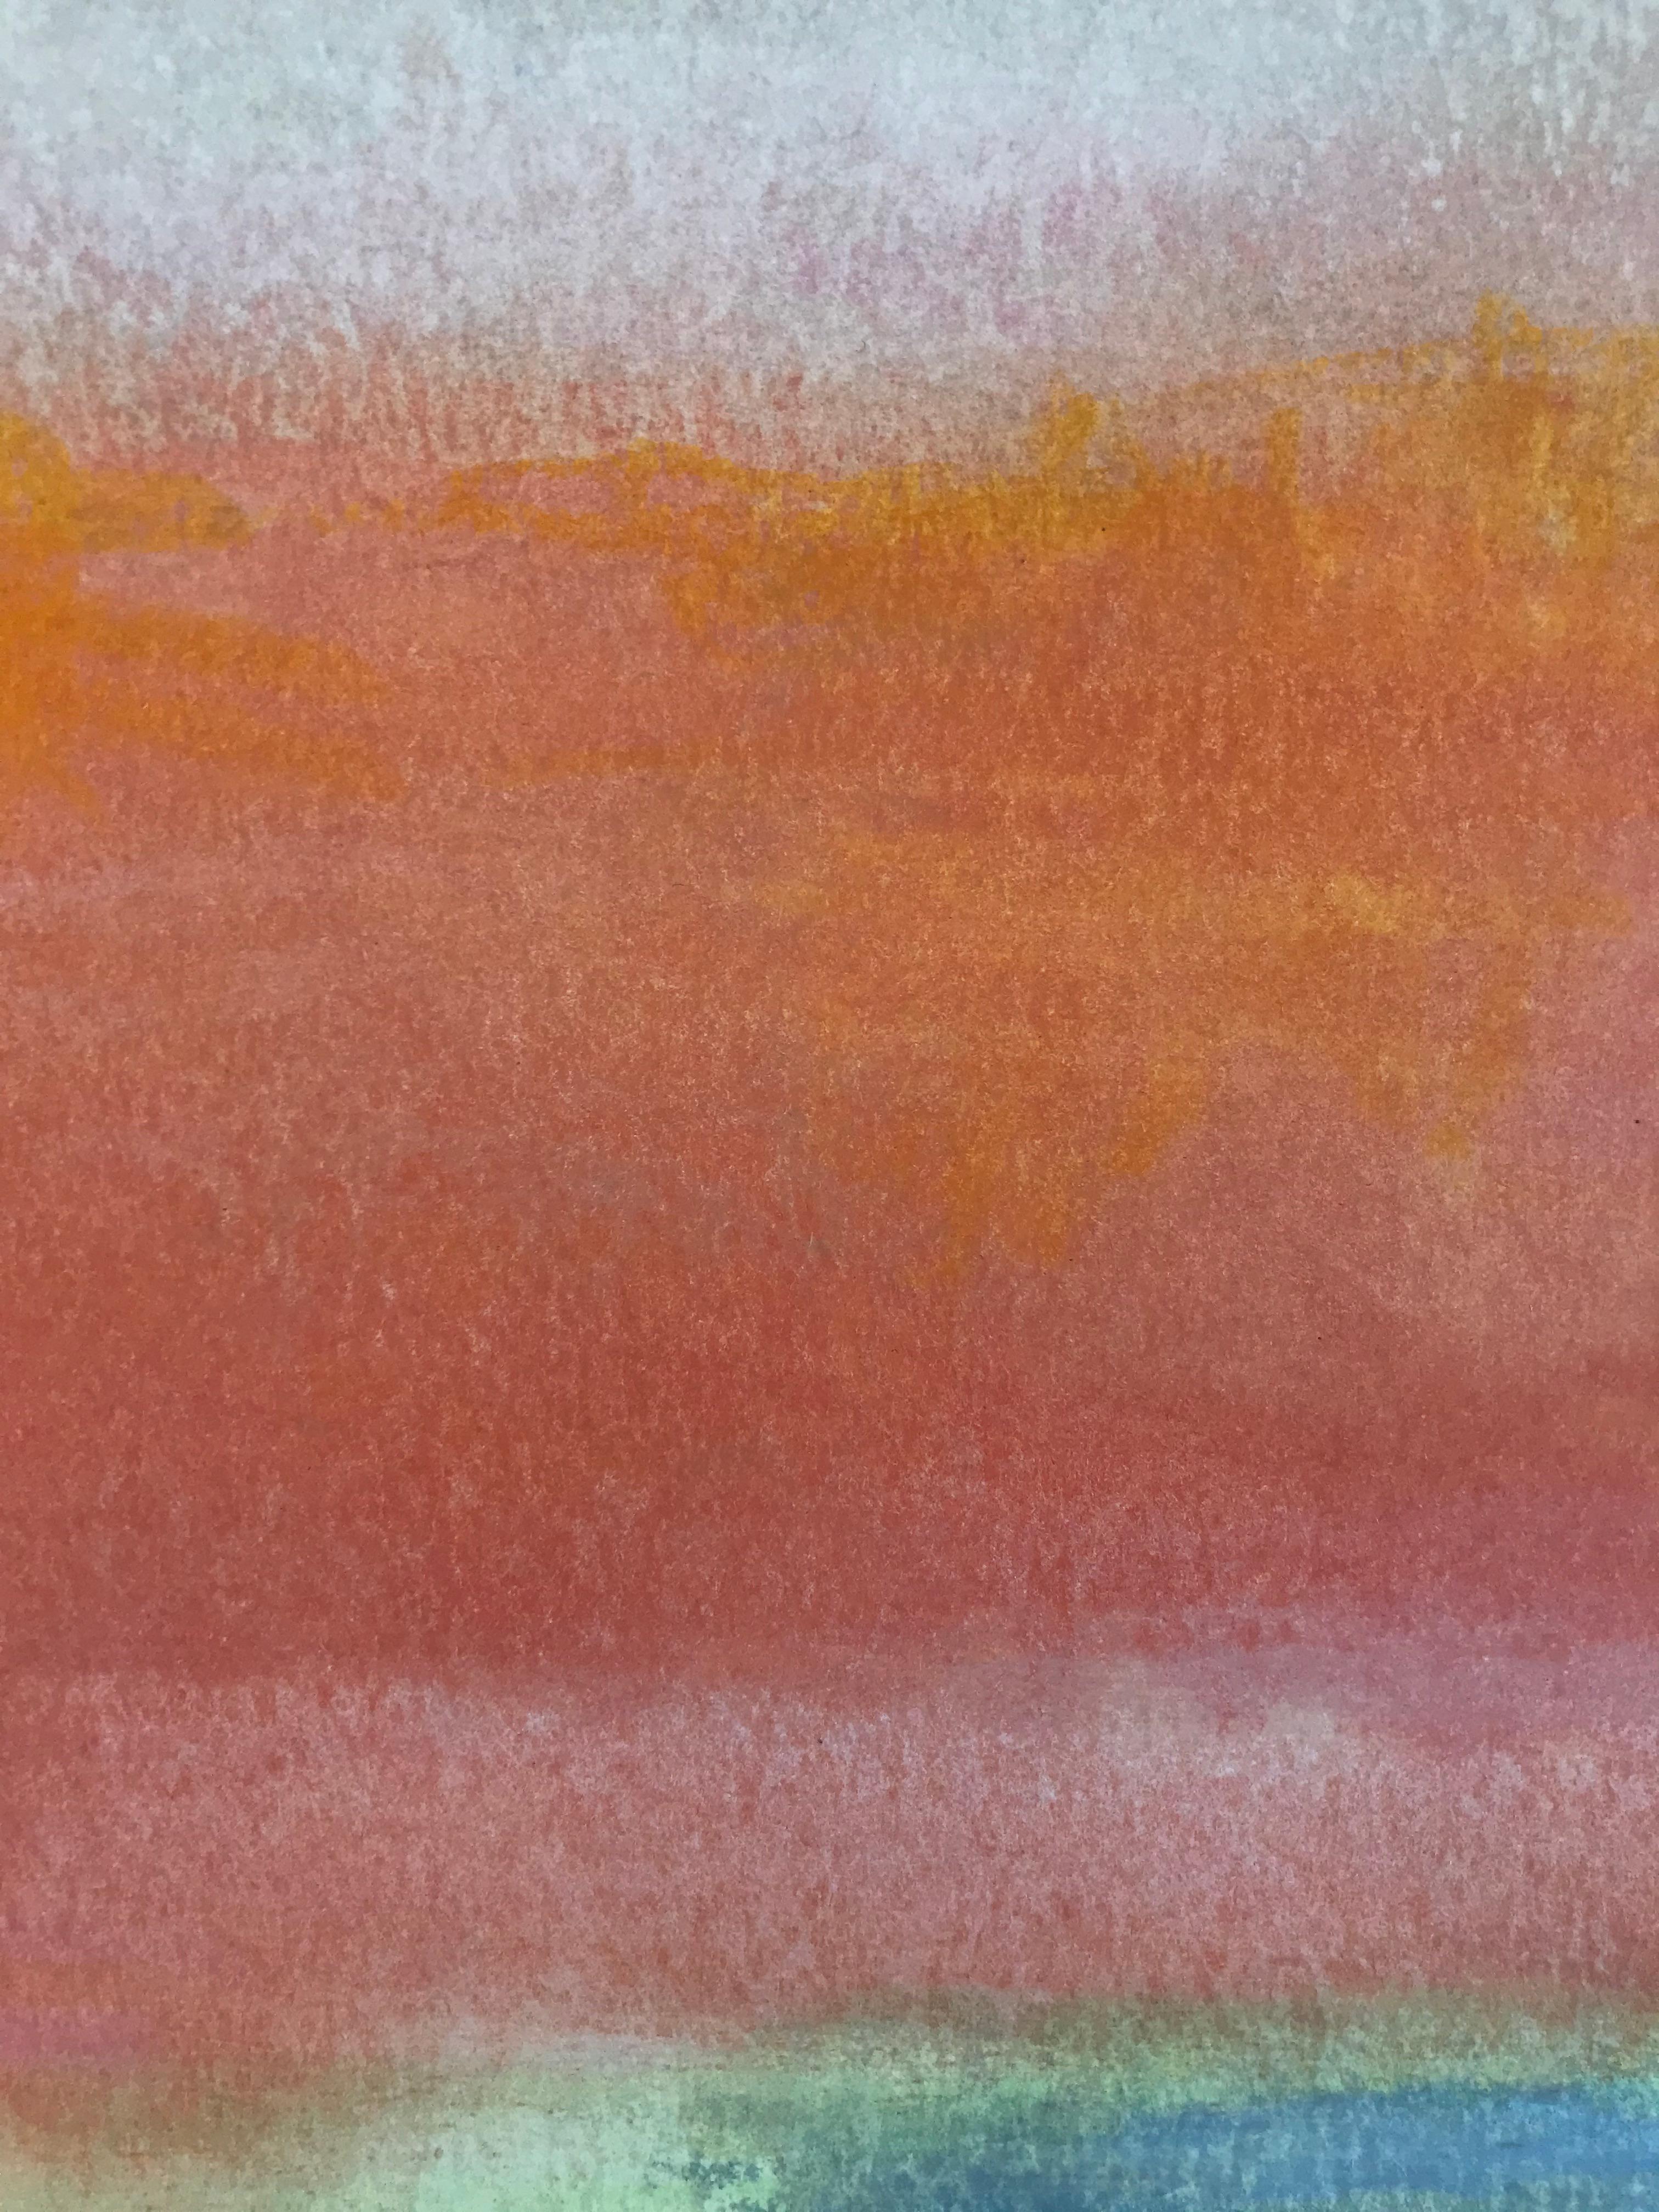 'Early Morning Tree Line' is an oil crayon landscape in the colors orange, red, gray, and lime green, and blue, reminiscent of Wolf Kahn with whom the artist studied in its soft, mysterious, evocative mood.

